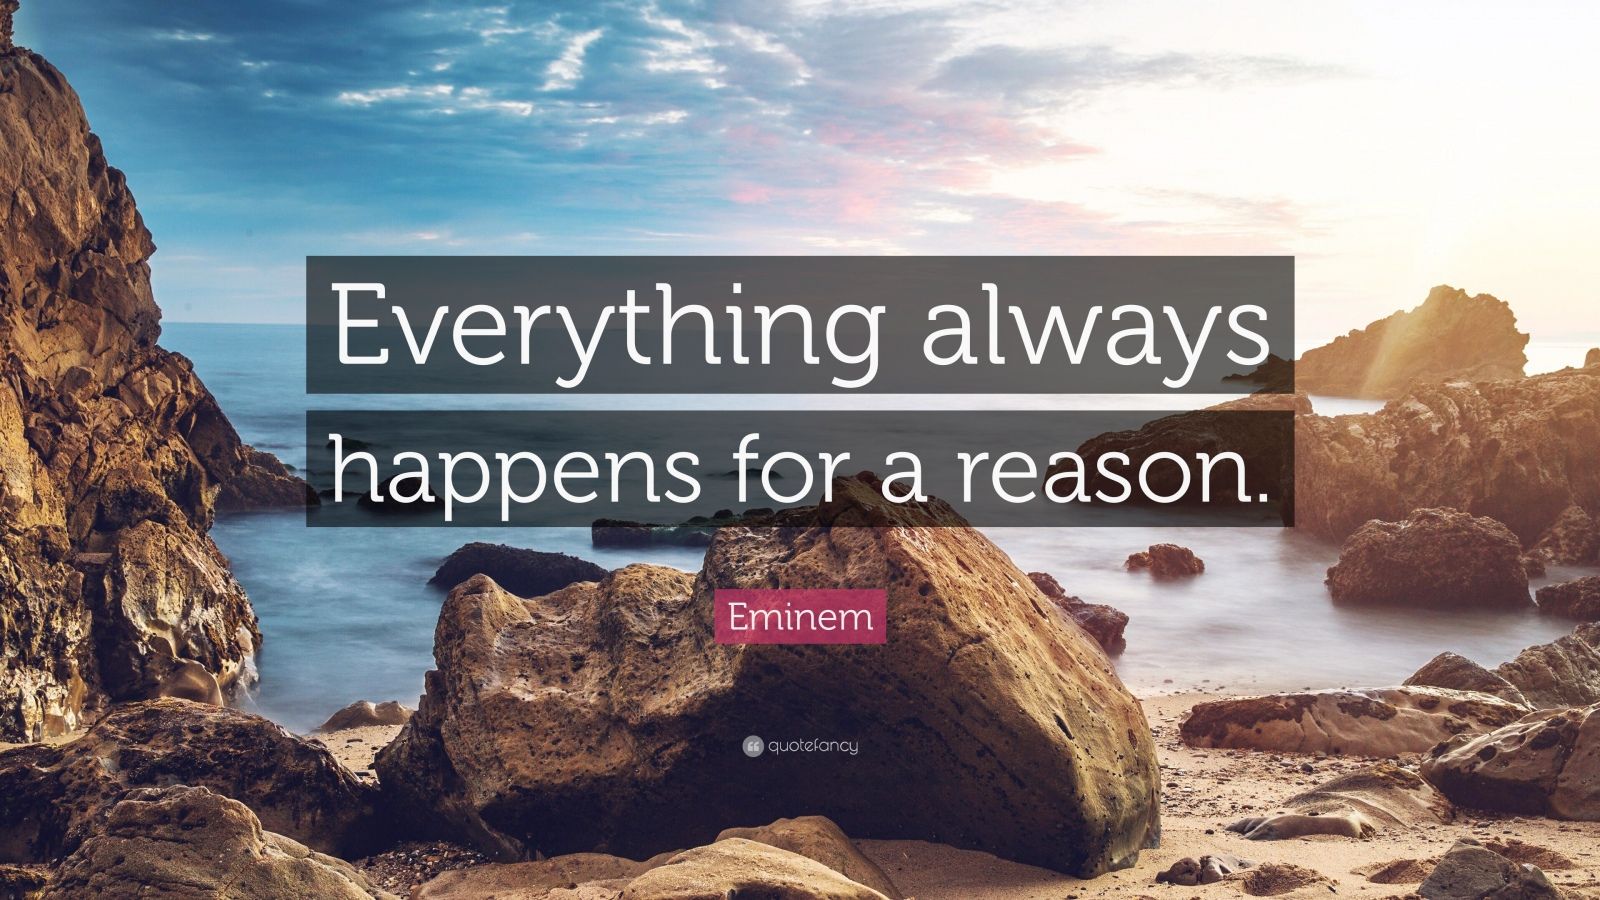 things happen for a reason